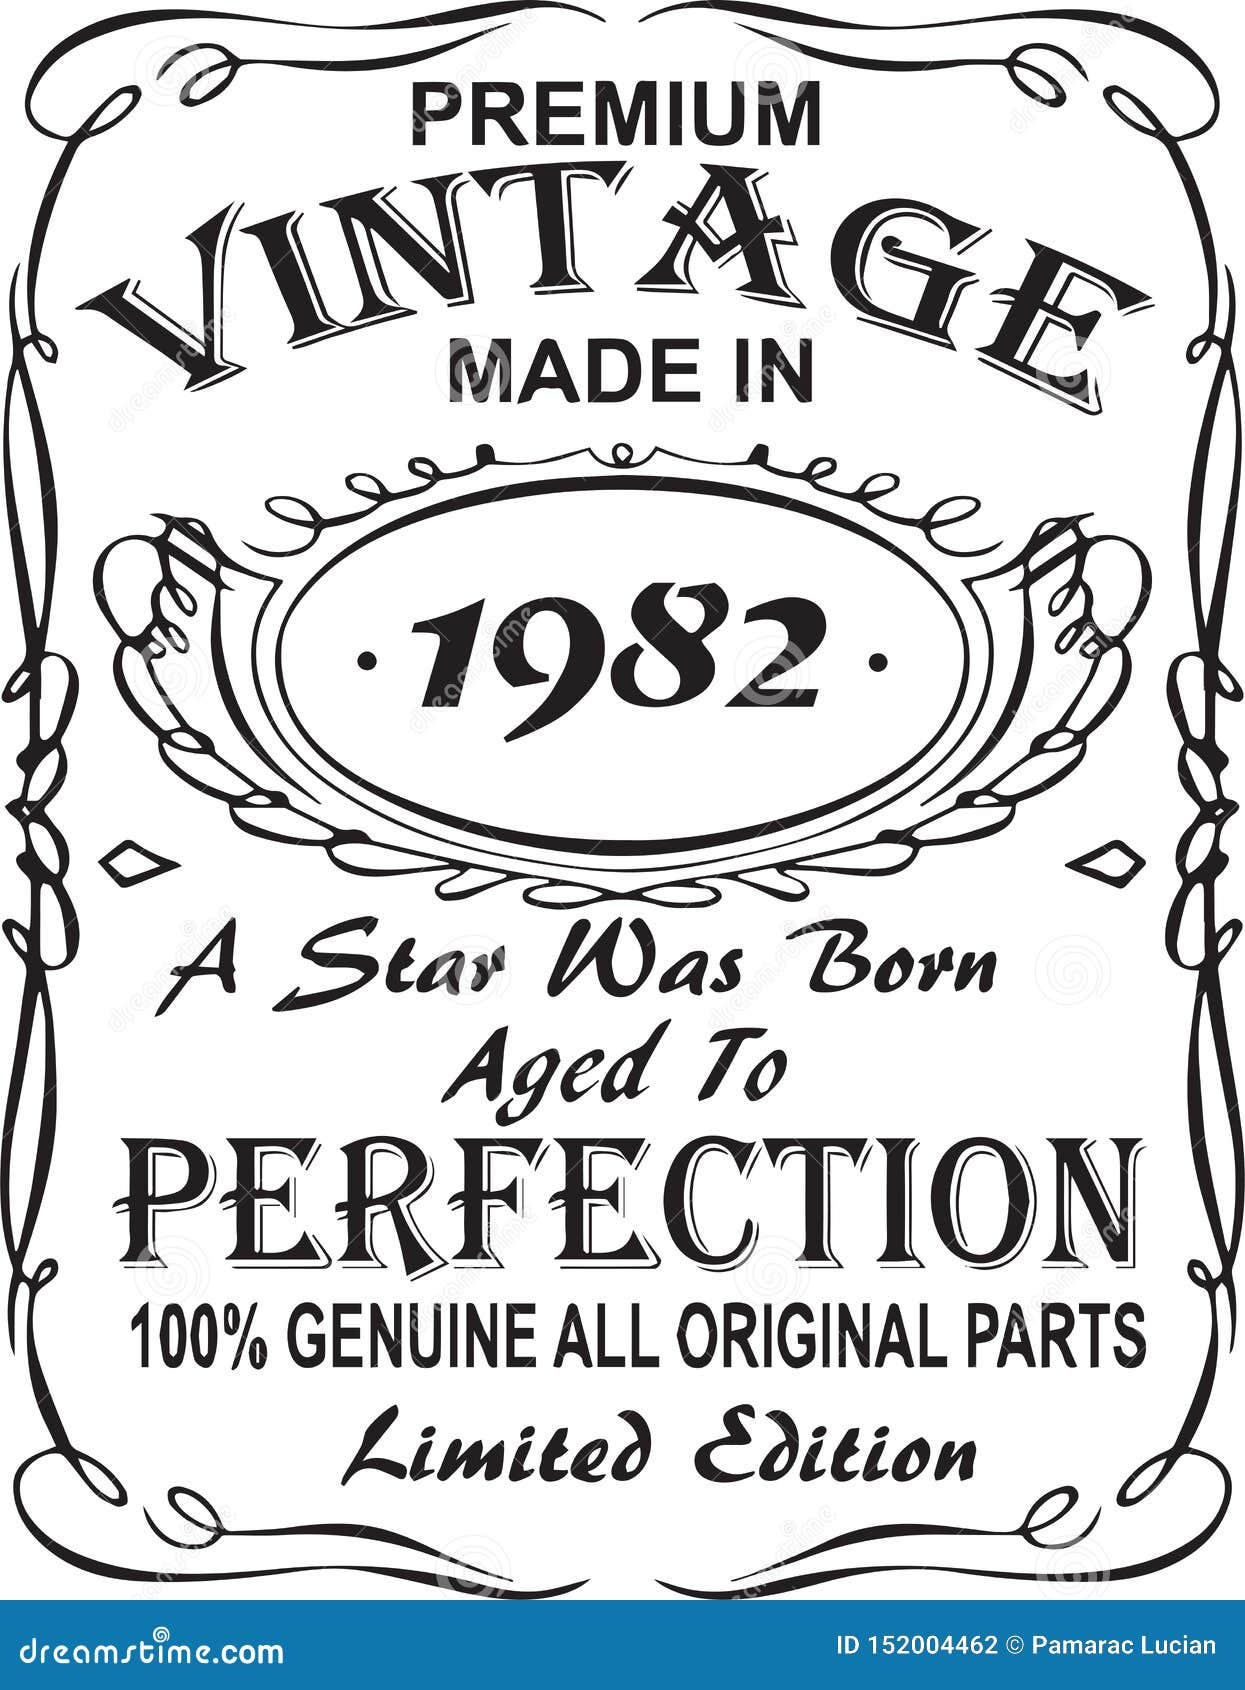 ial t-shirt print .premium vintage made in 1982 a star was born aged to perfection 100% genuine all original parts lim